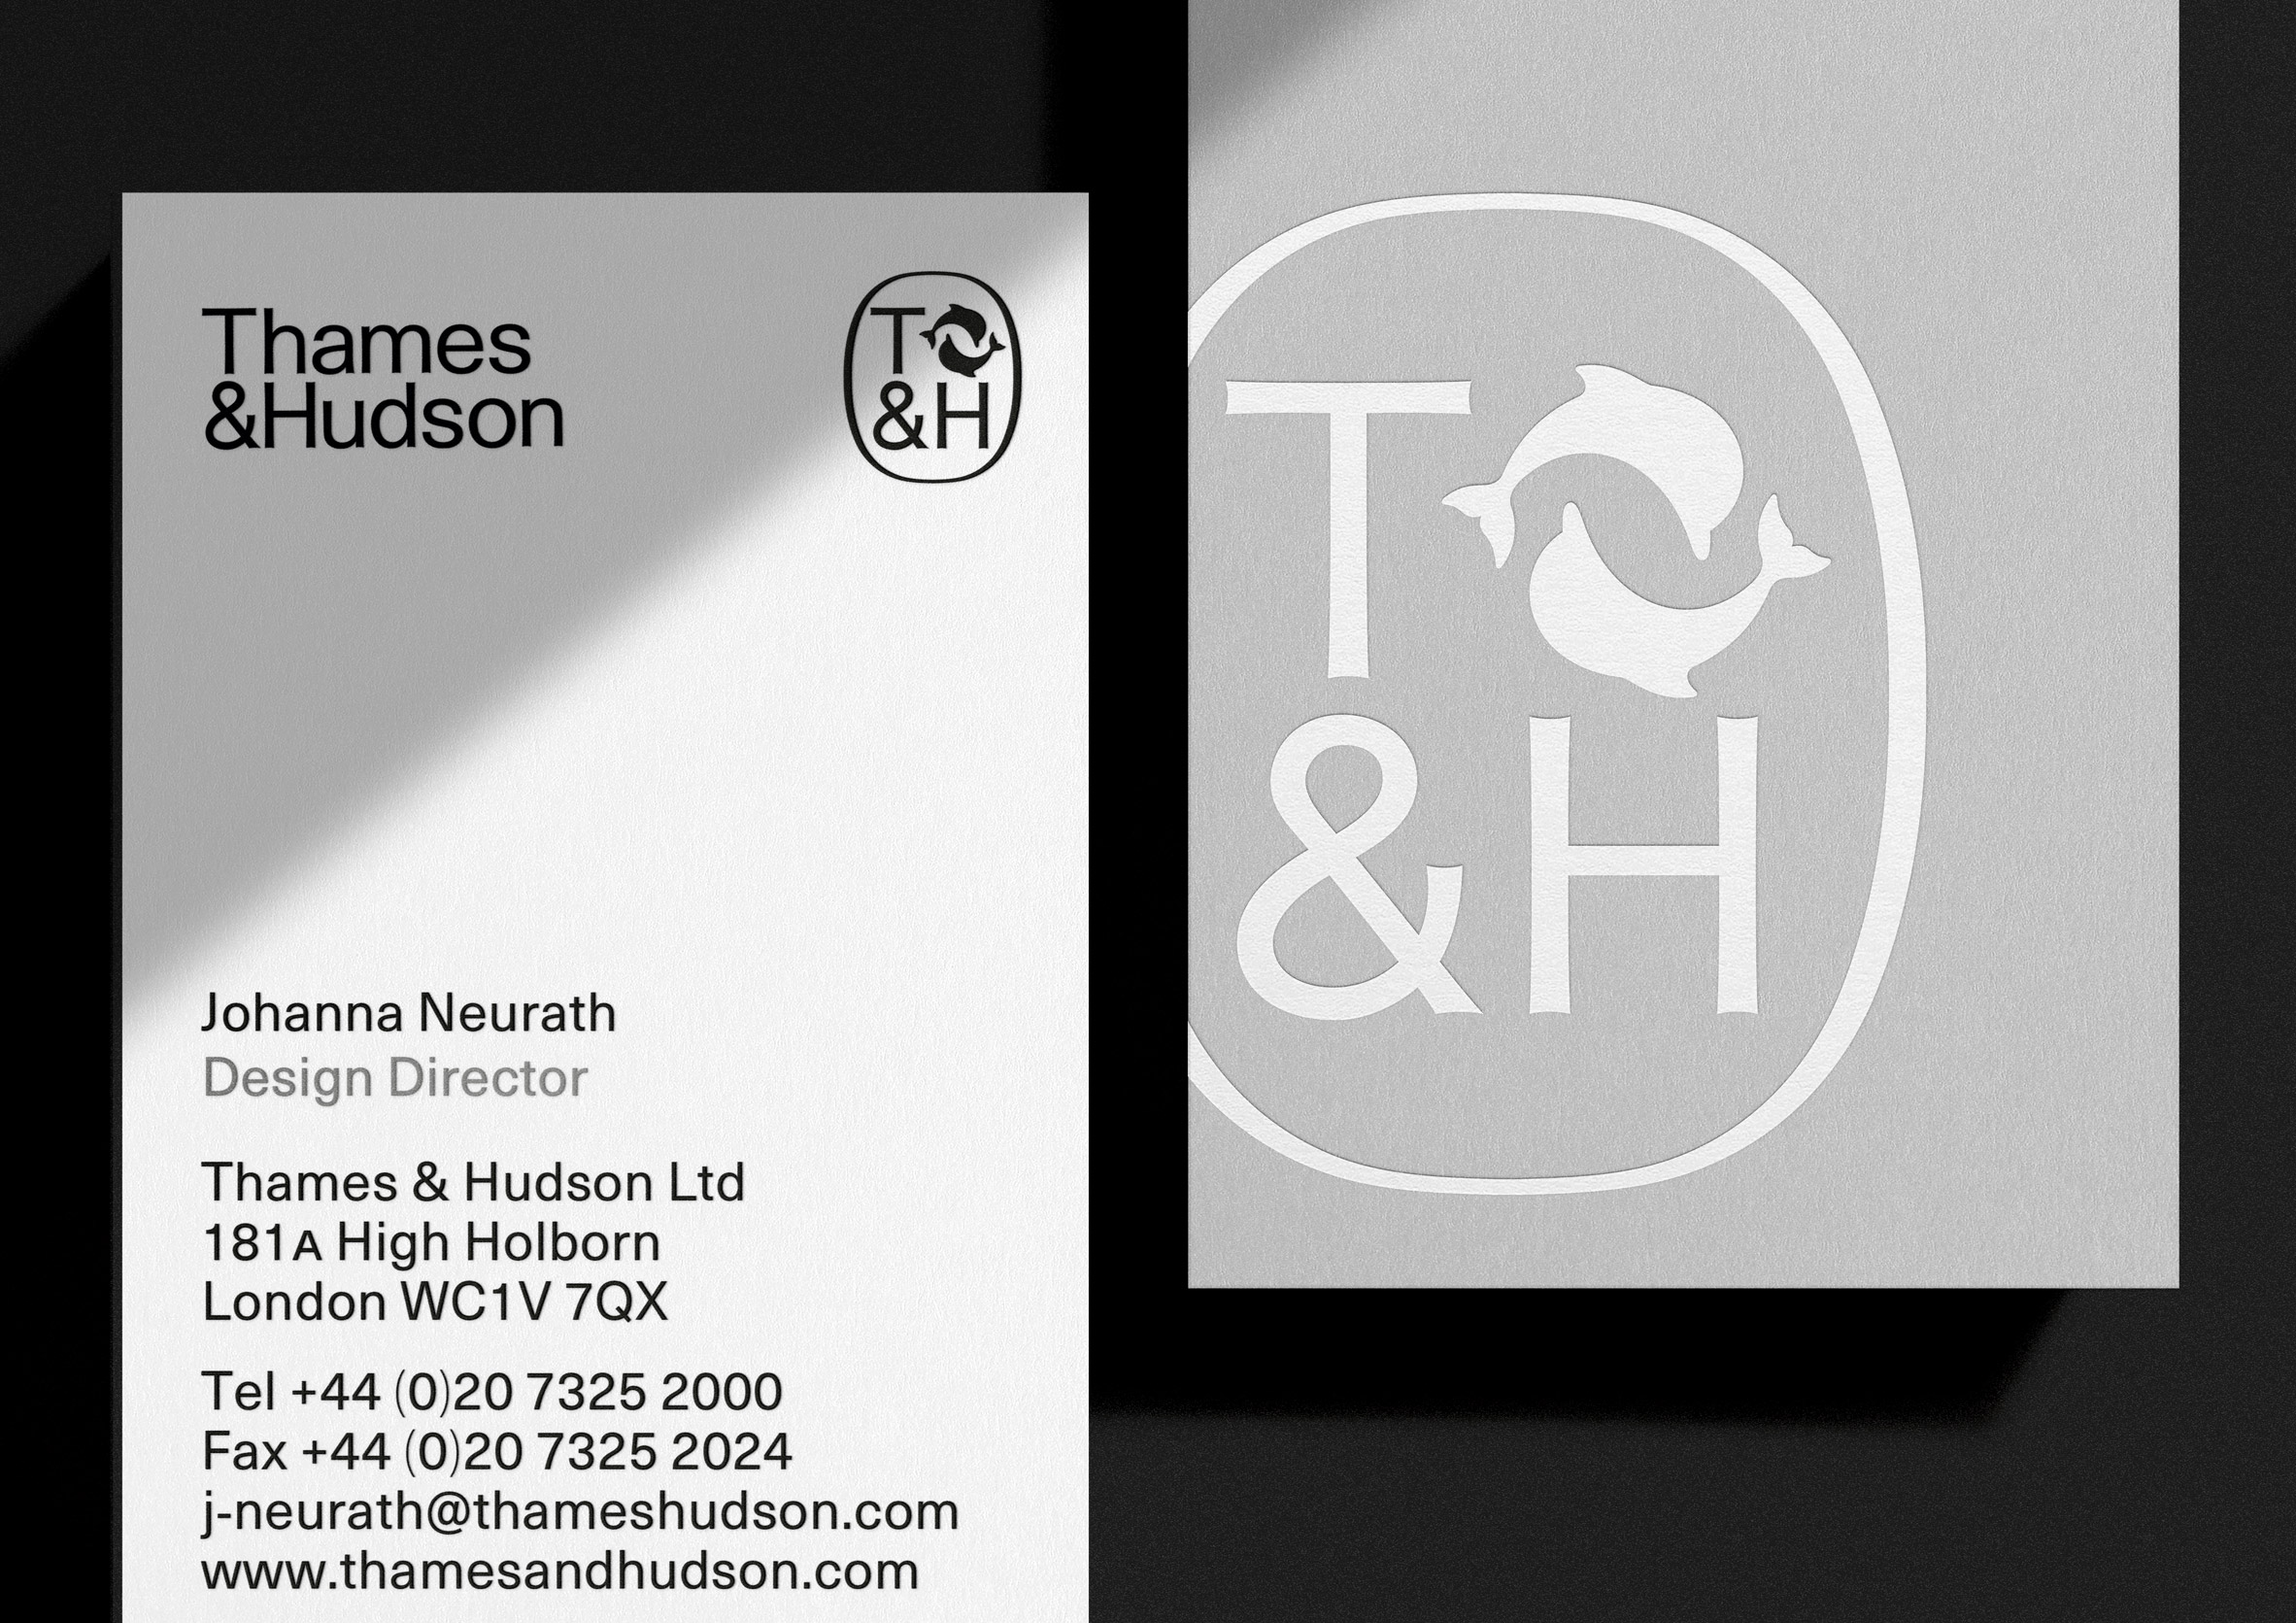 Pentagram "future-proofs" Thames & Hudson with latest rebrand